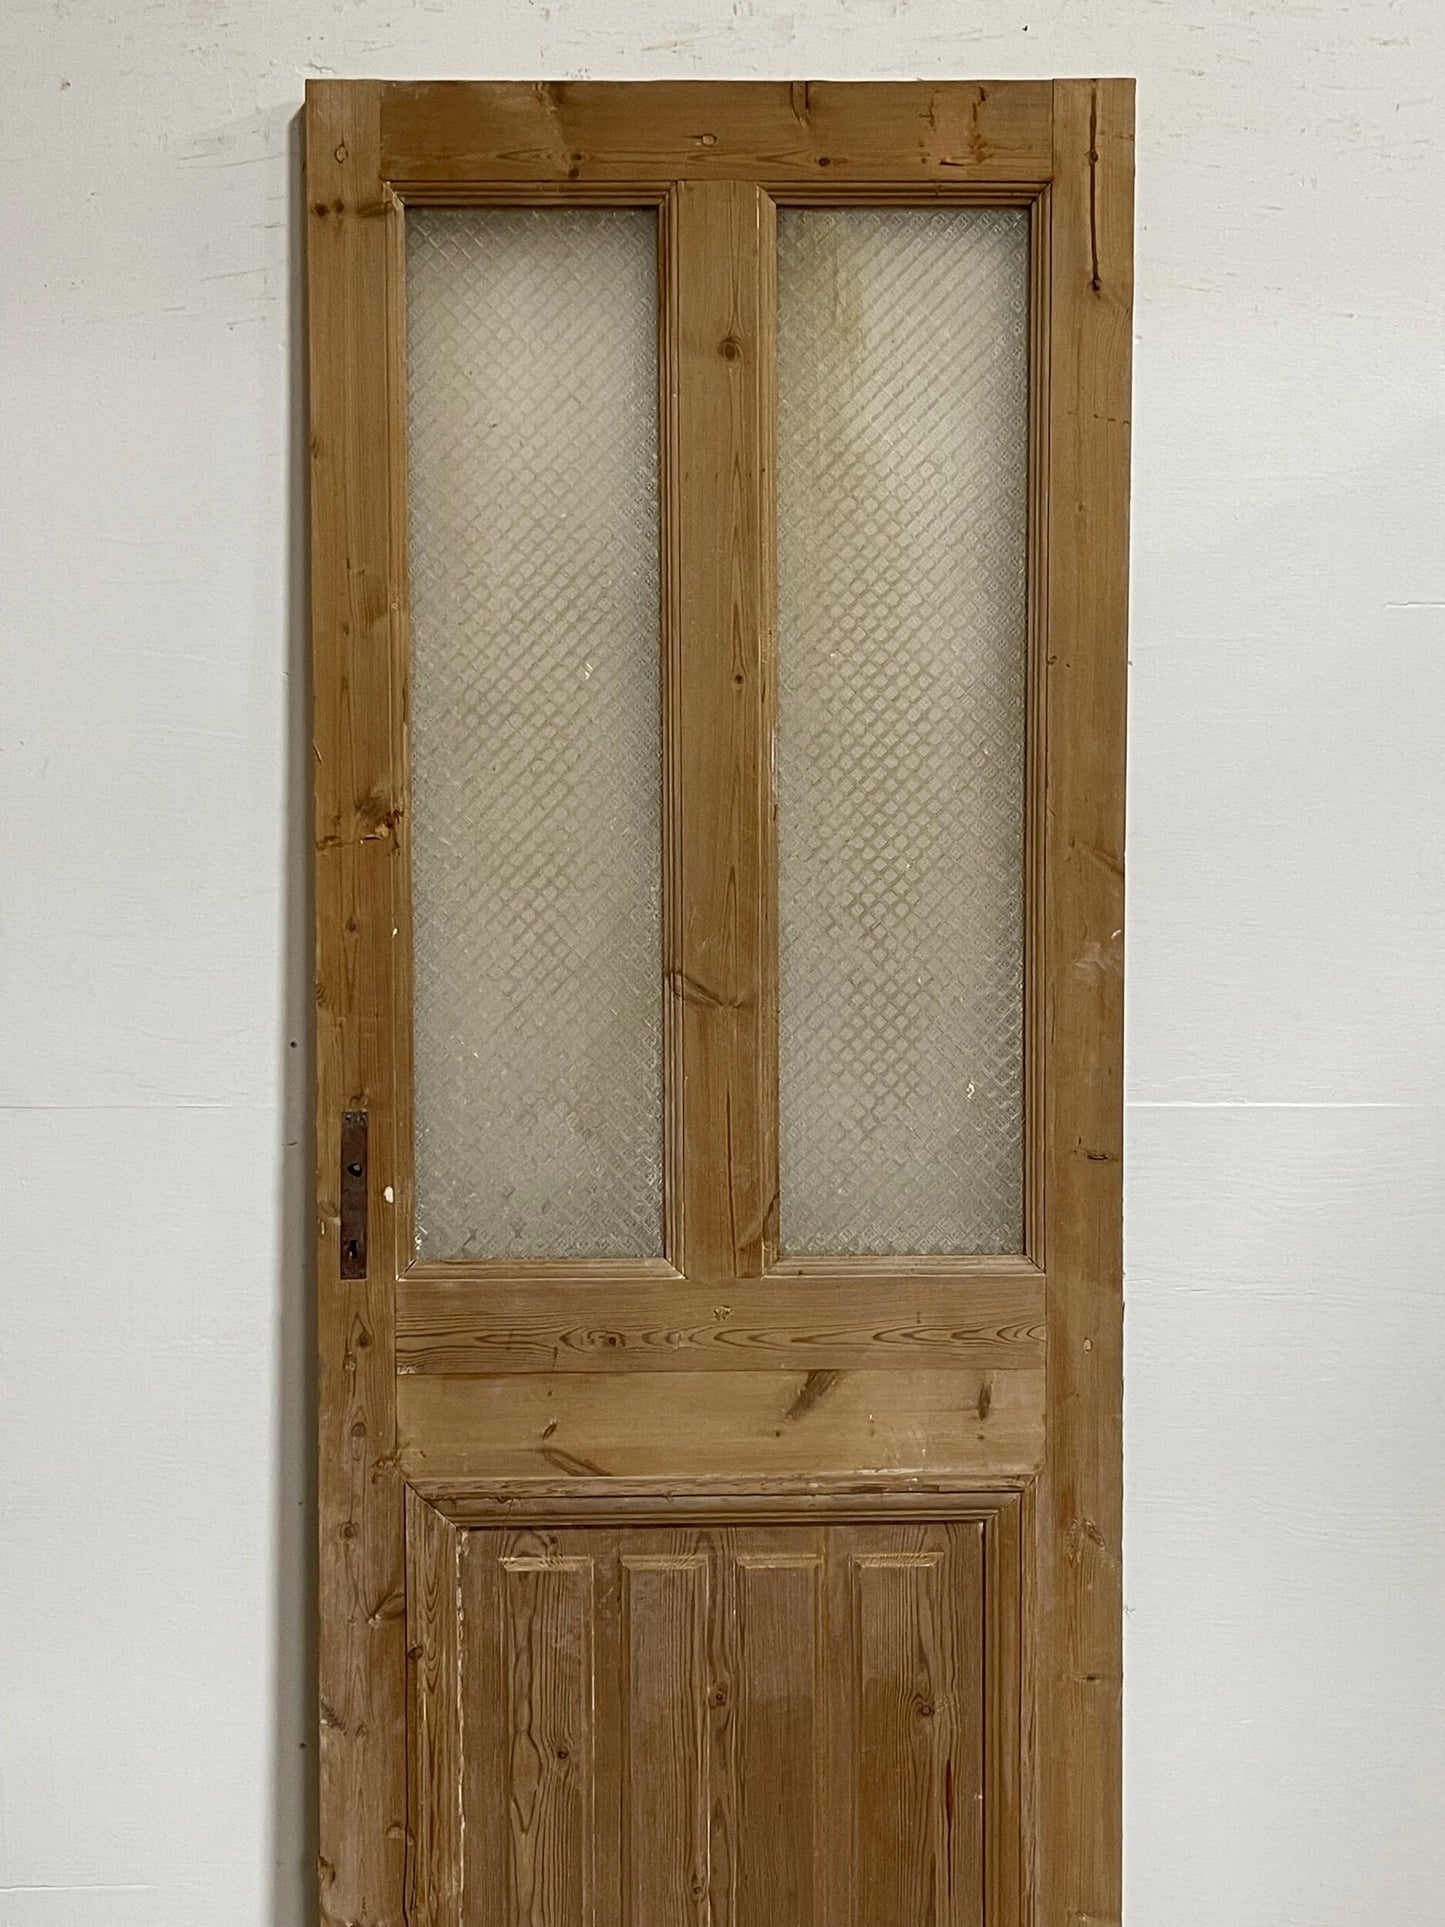 Antique French door with glass (86.25x30.25) H0170s